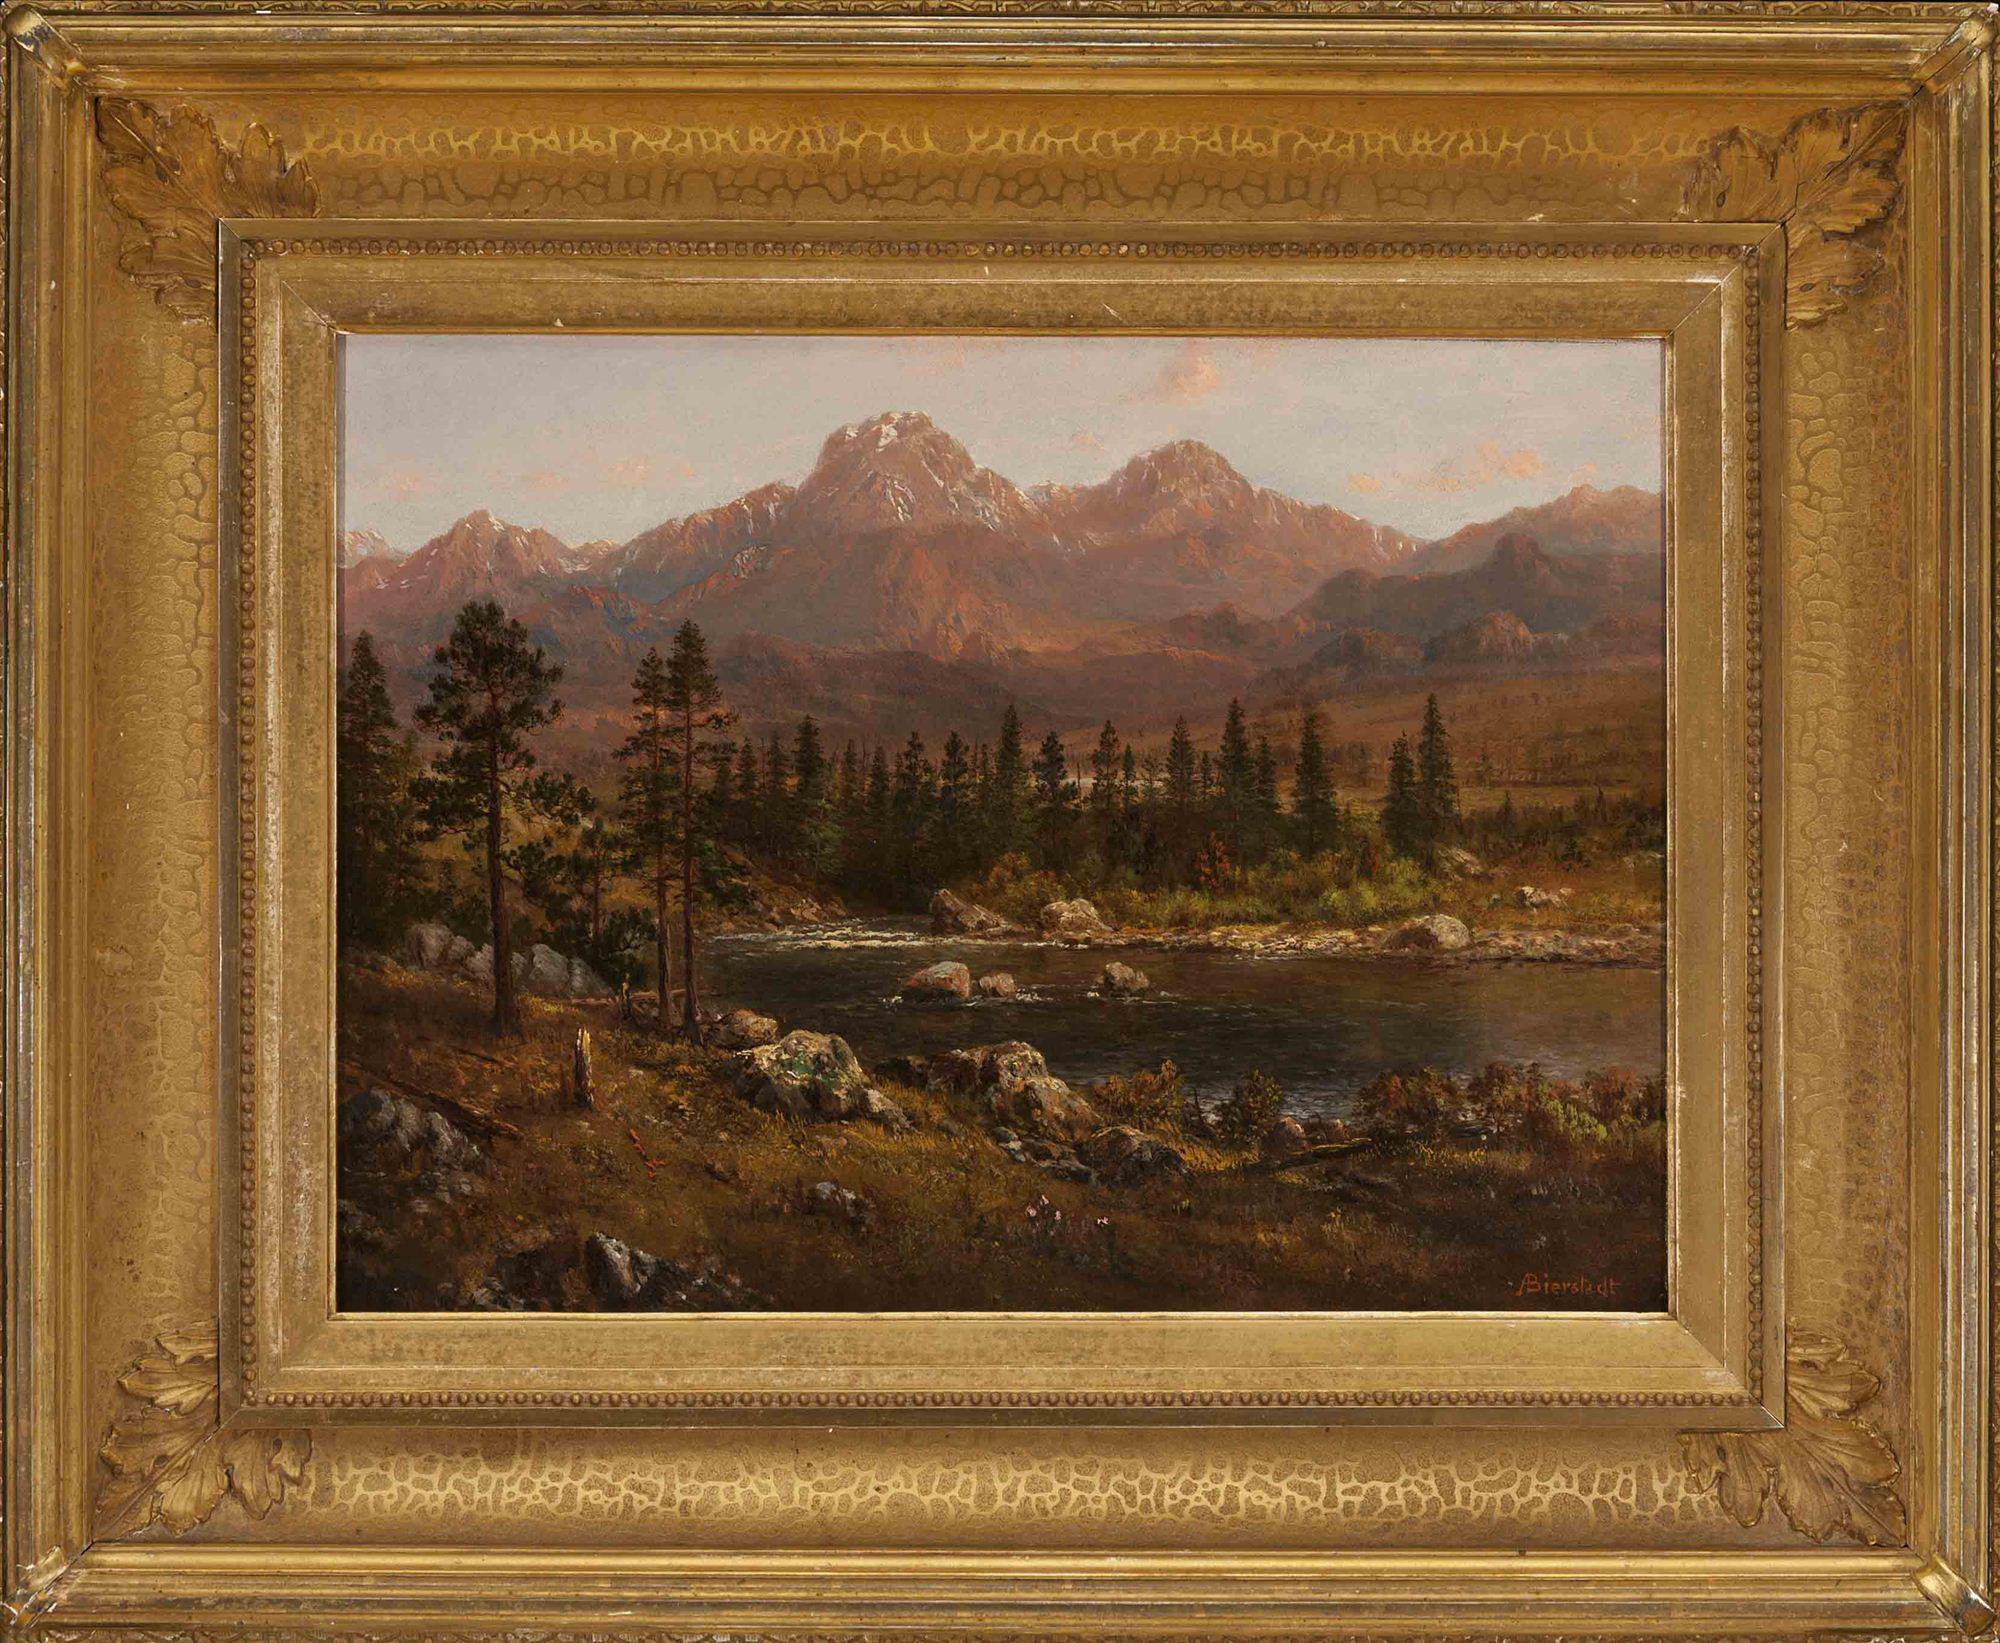 

											</b>

											<em>
												Lure of the West: Celebrating 50 Years of Gerald Peters Gallery  </em> 

											<h4>
												New York: April 29 - May 27, 2022      Santa Fe: June 24 - July 23, 2022											</h4>

		                																																													<i>Longs Peak, Colorado,</i>  
																																								ca. 1860's, 
																																								oil on paper mounted on canvas, 
																																								14 x 19 inches 
																								
		                				